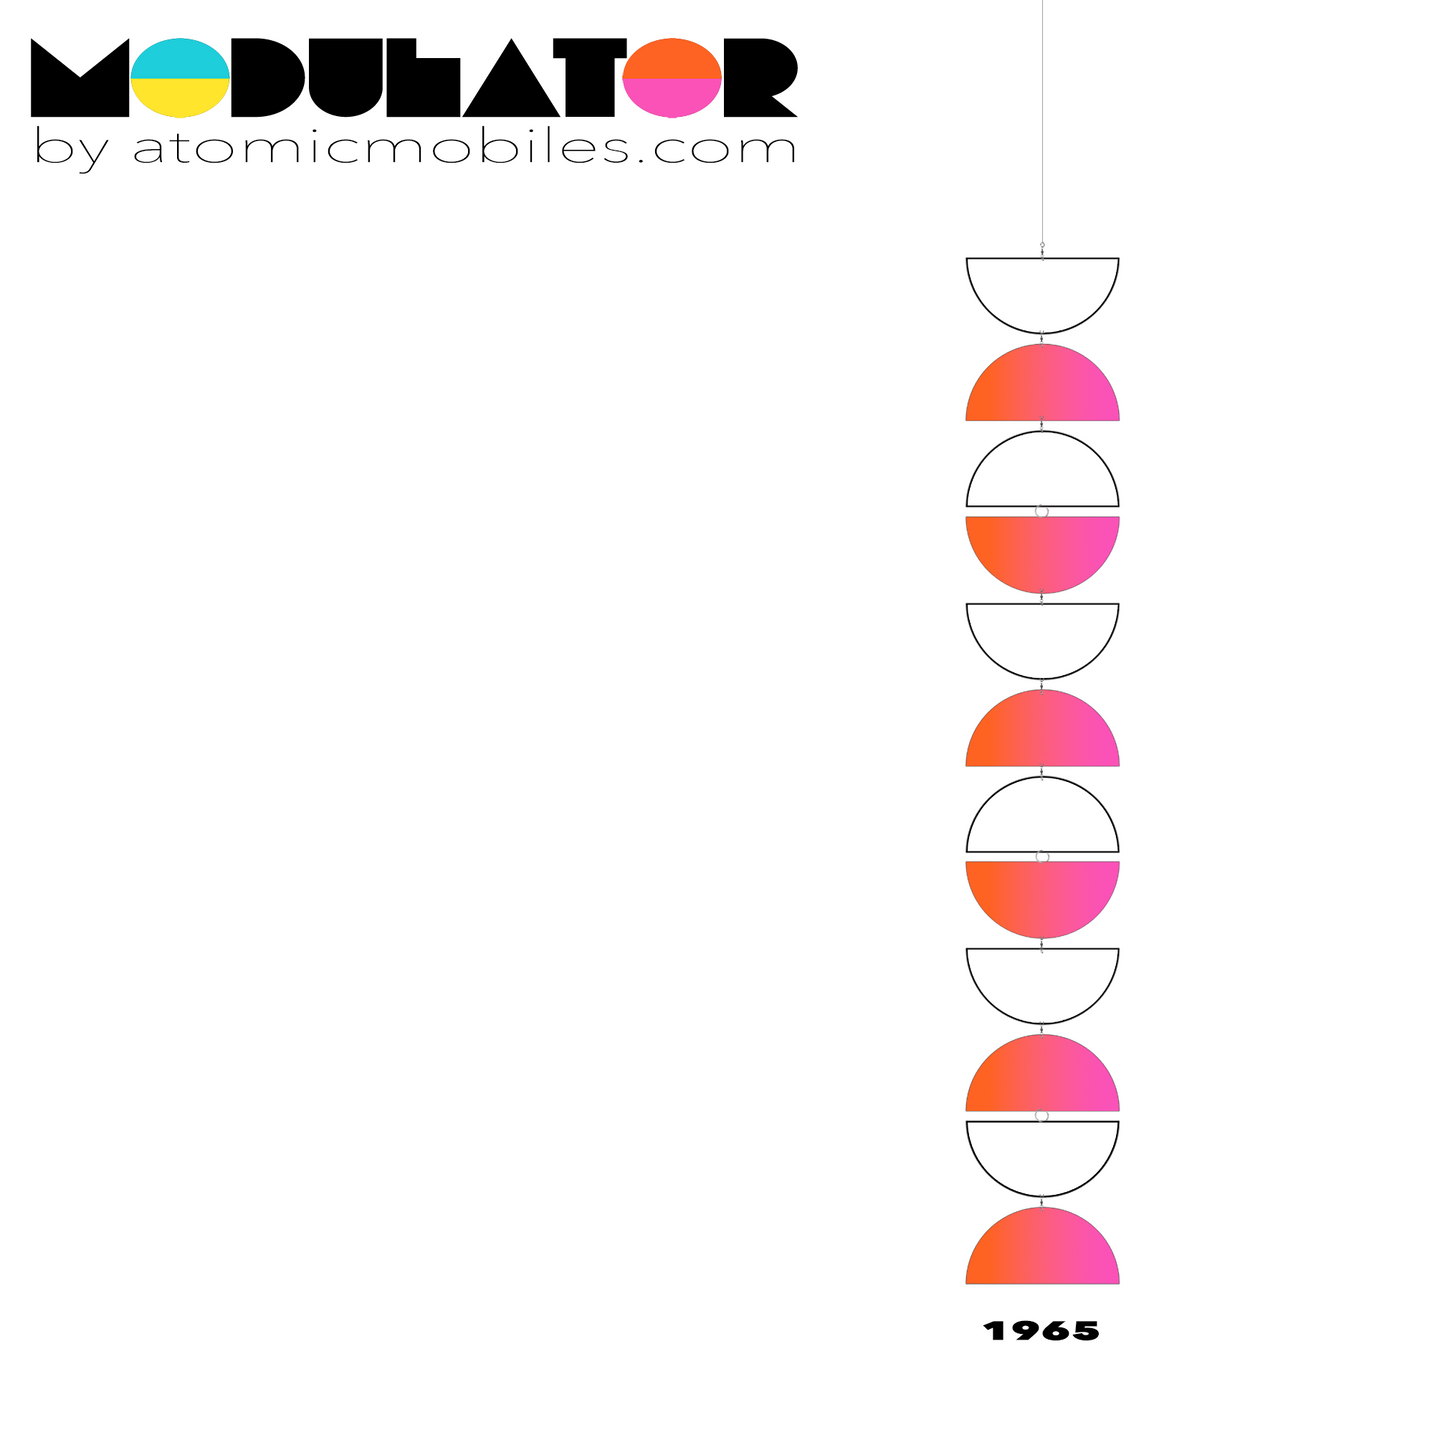 MODulator Vertical Art Mobile - retro mid century modern style hanging art mobile in 1965 Colors of White and Fluorescent Pink by AtomicMobiles.com